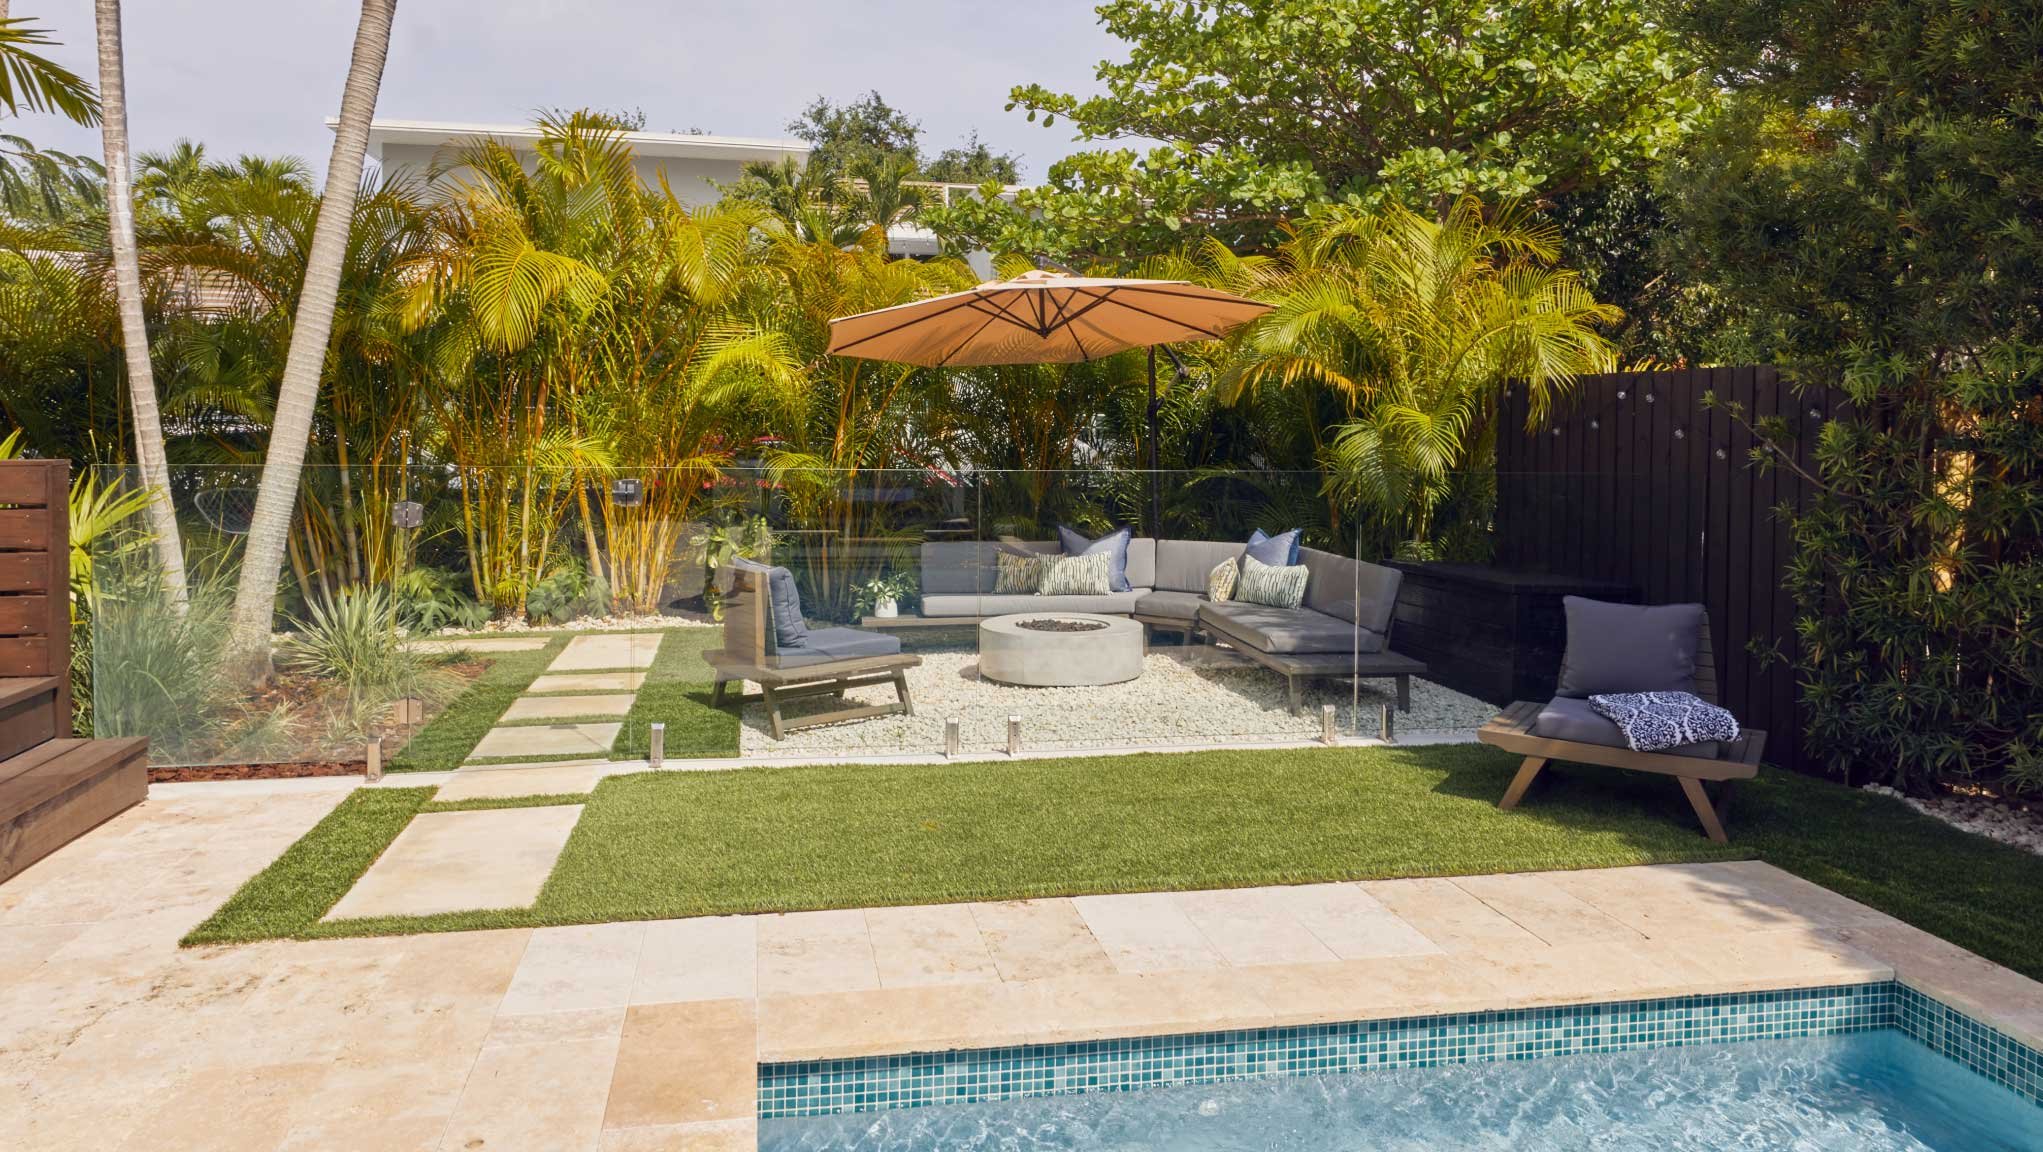 Stylish backyard with pool, stepper path, and plexiglass wall containing an outdoor lounge area